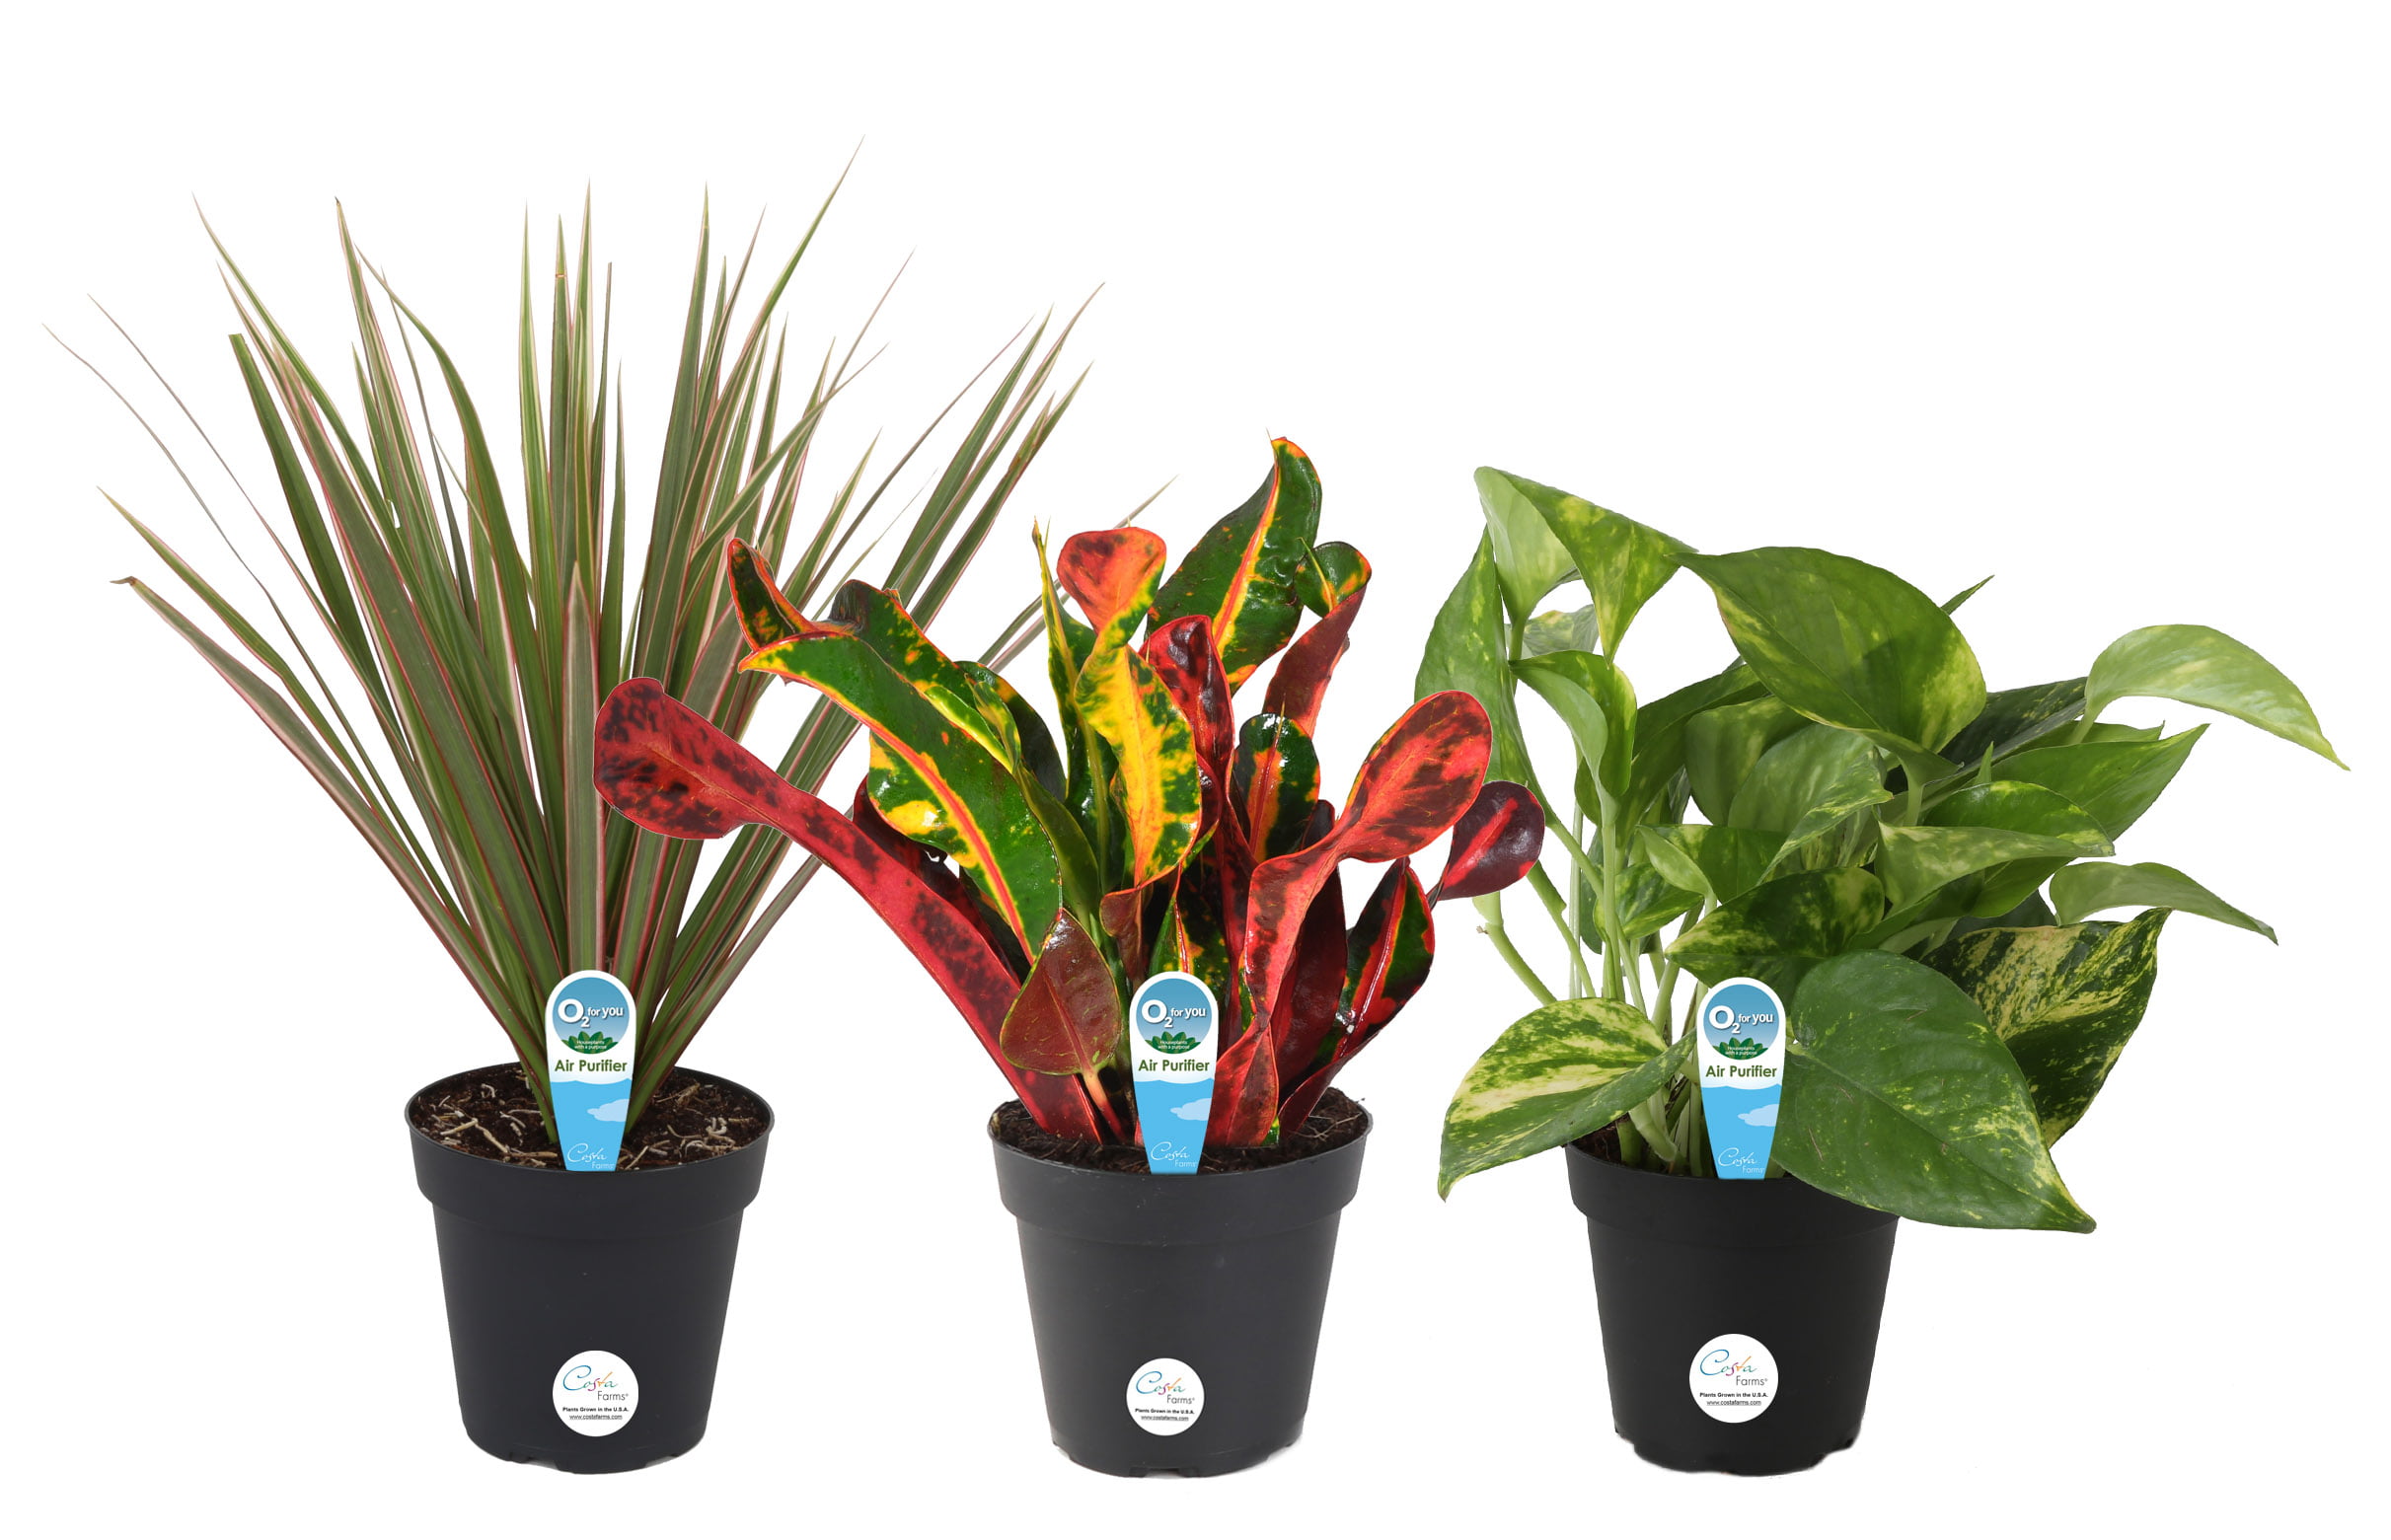 Costa Farms Live Indoor 10in Tall Clean Air Plants With Benefits In 4in Pot 3 Pack Walmart